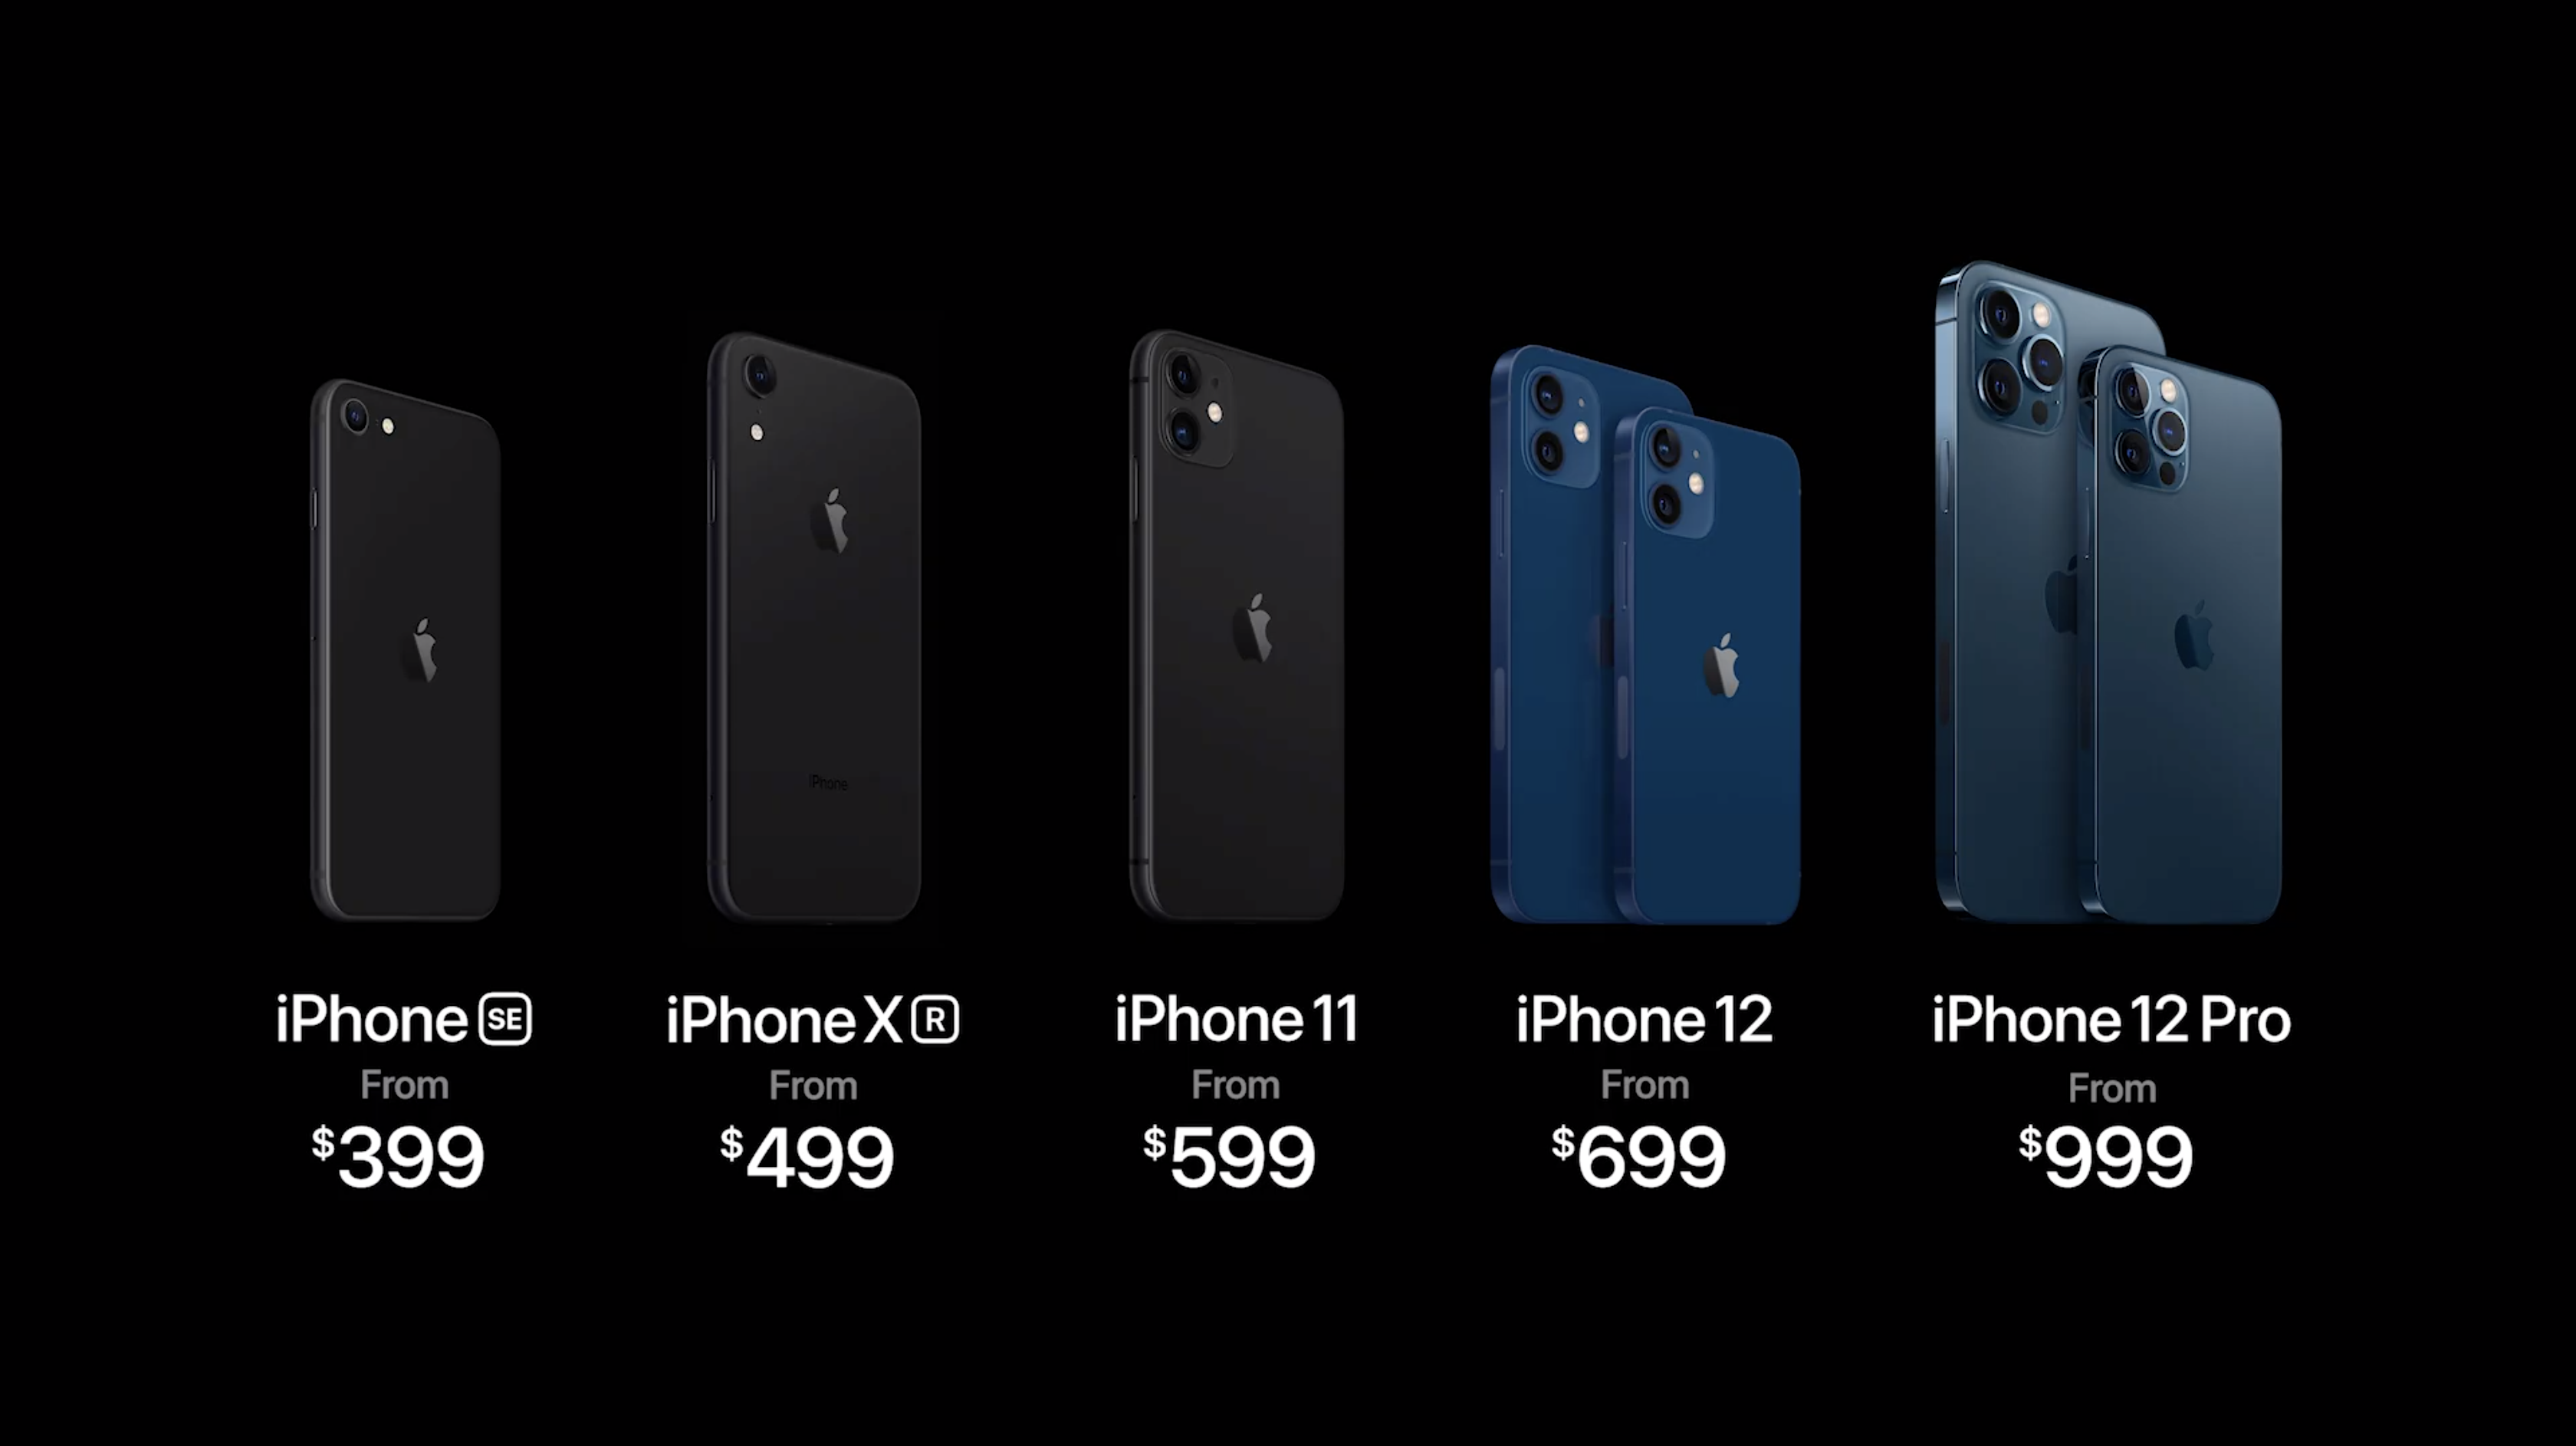 iPhone 12 line and pricing